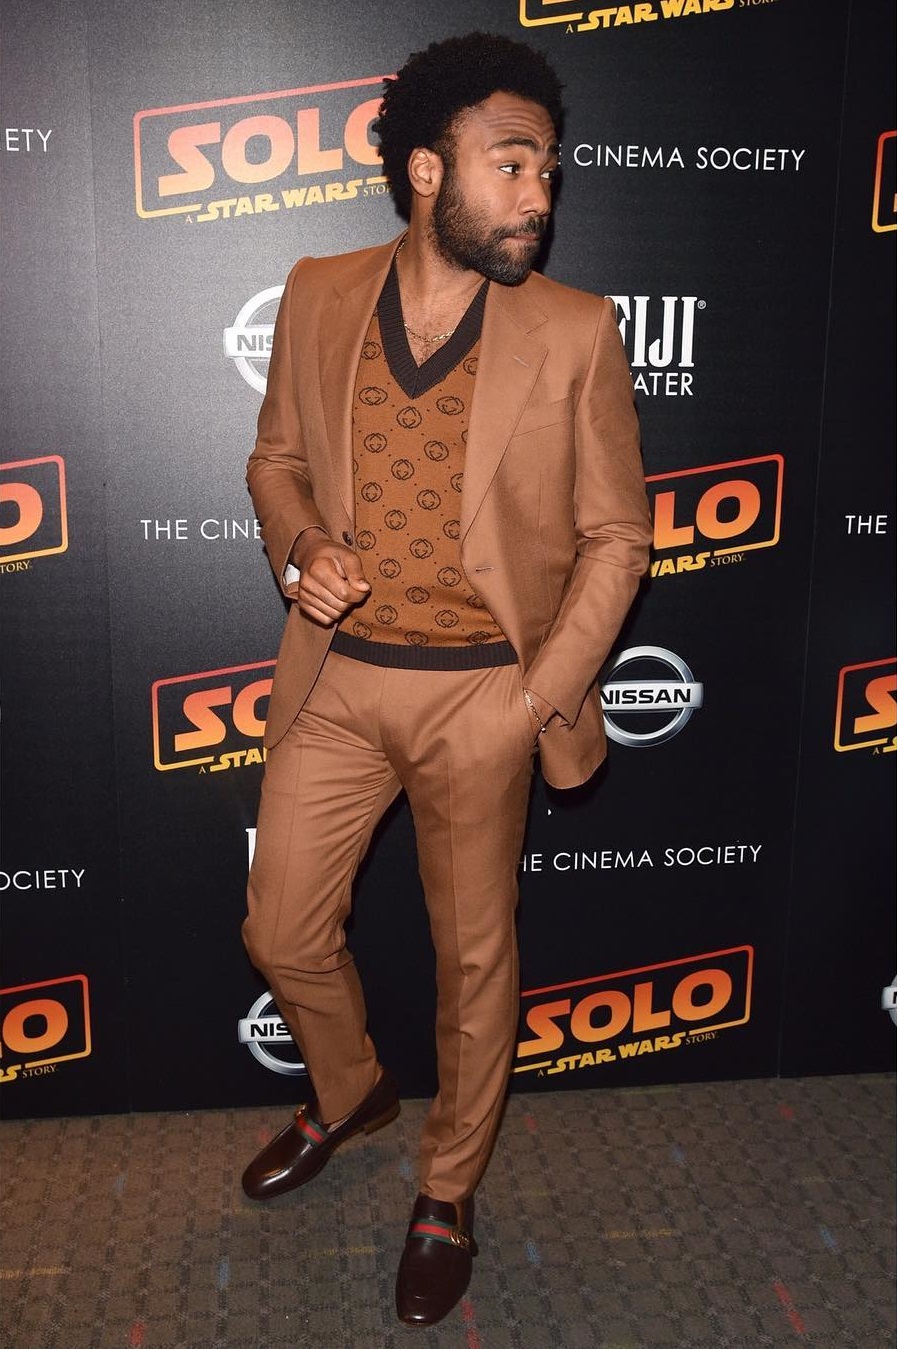 SPOTTED: Donald Glover Sports Gucci at a Special Screening of “Solo: A Star Wars Story”